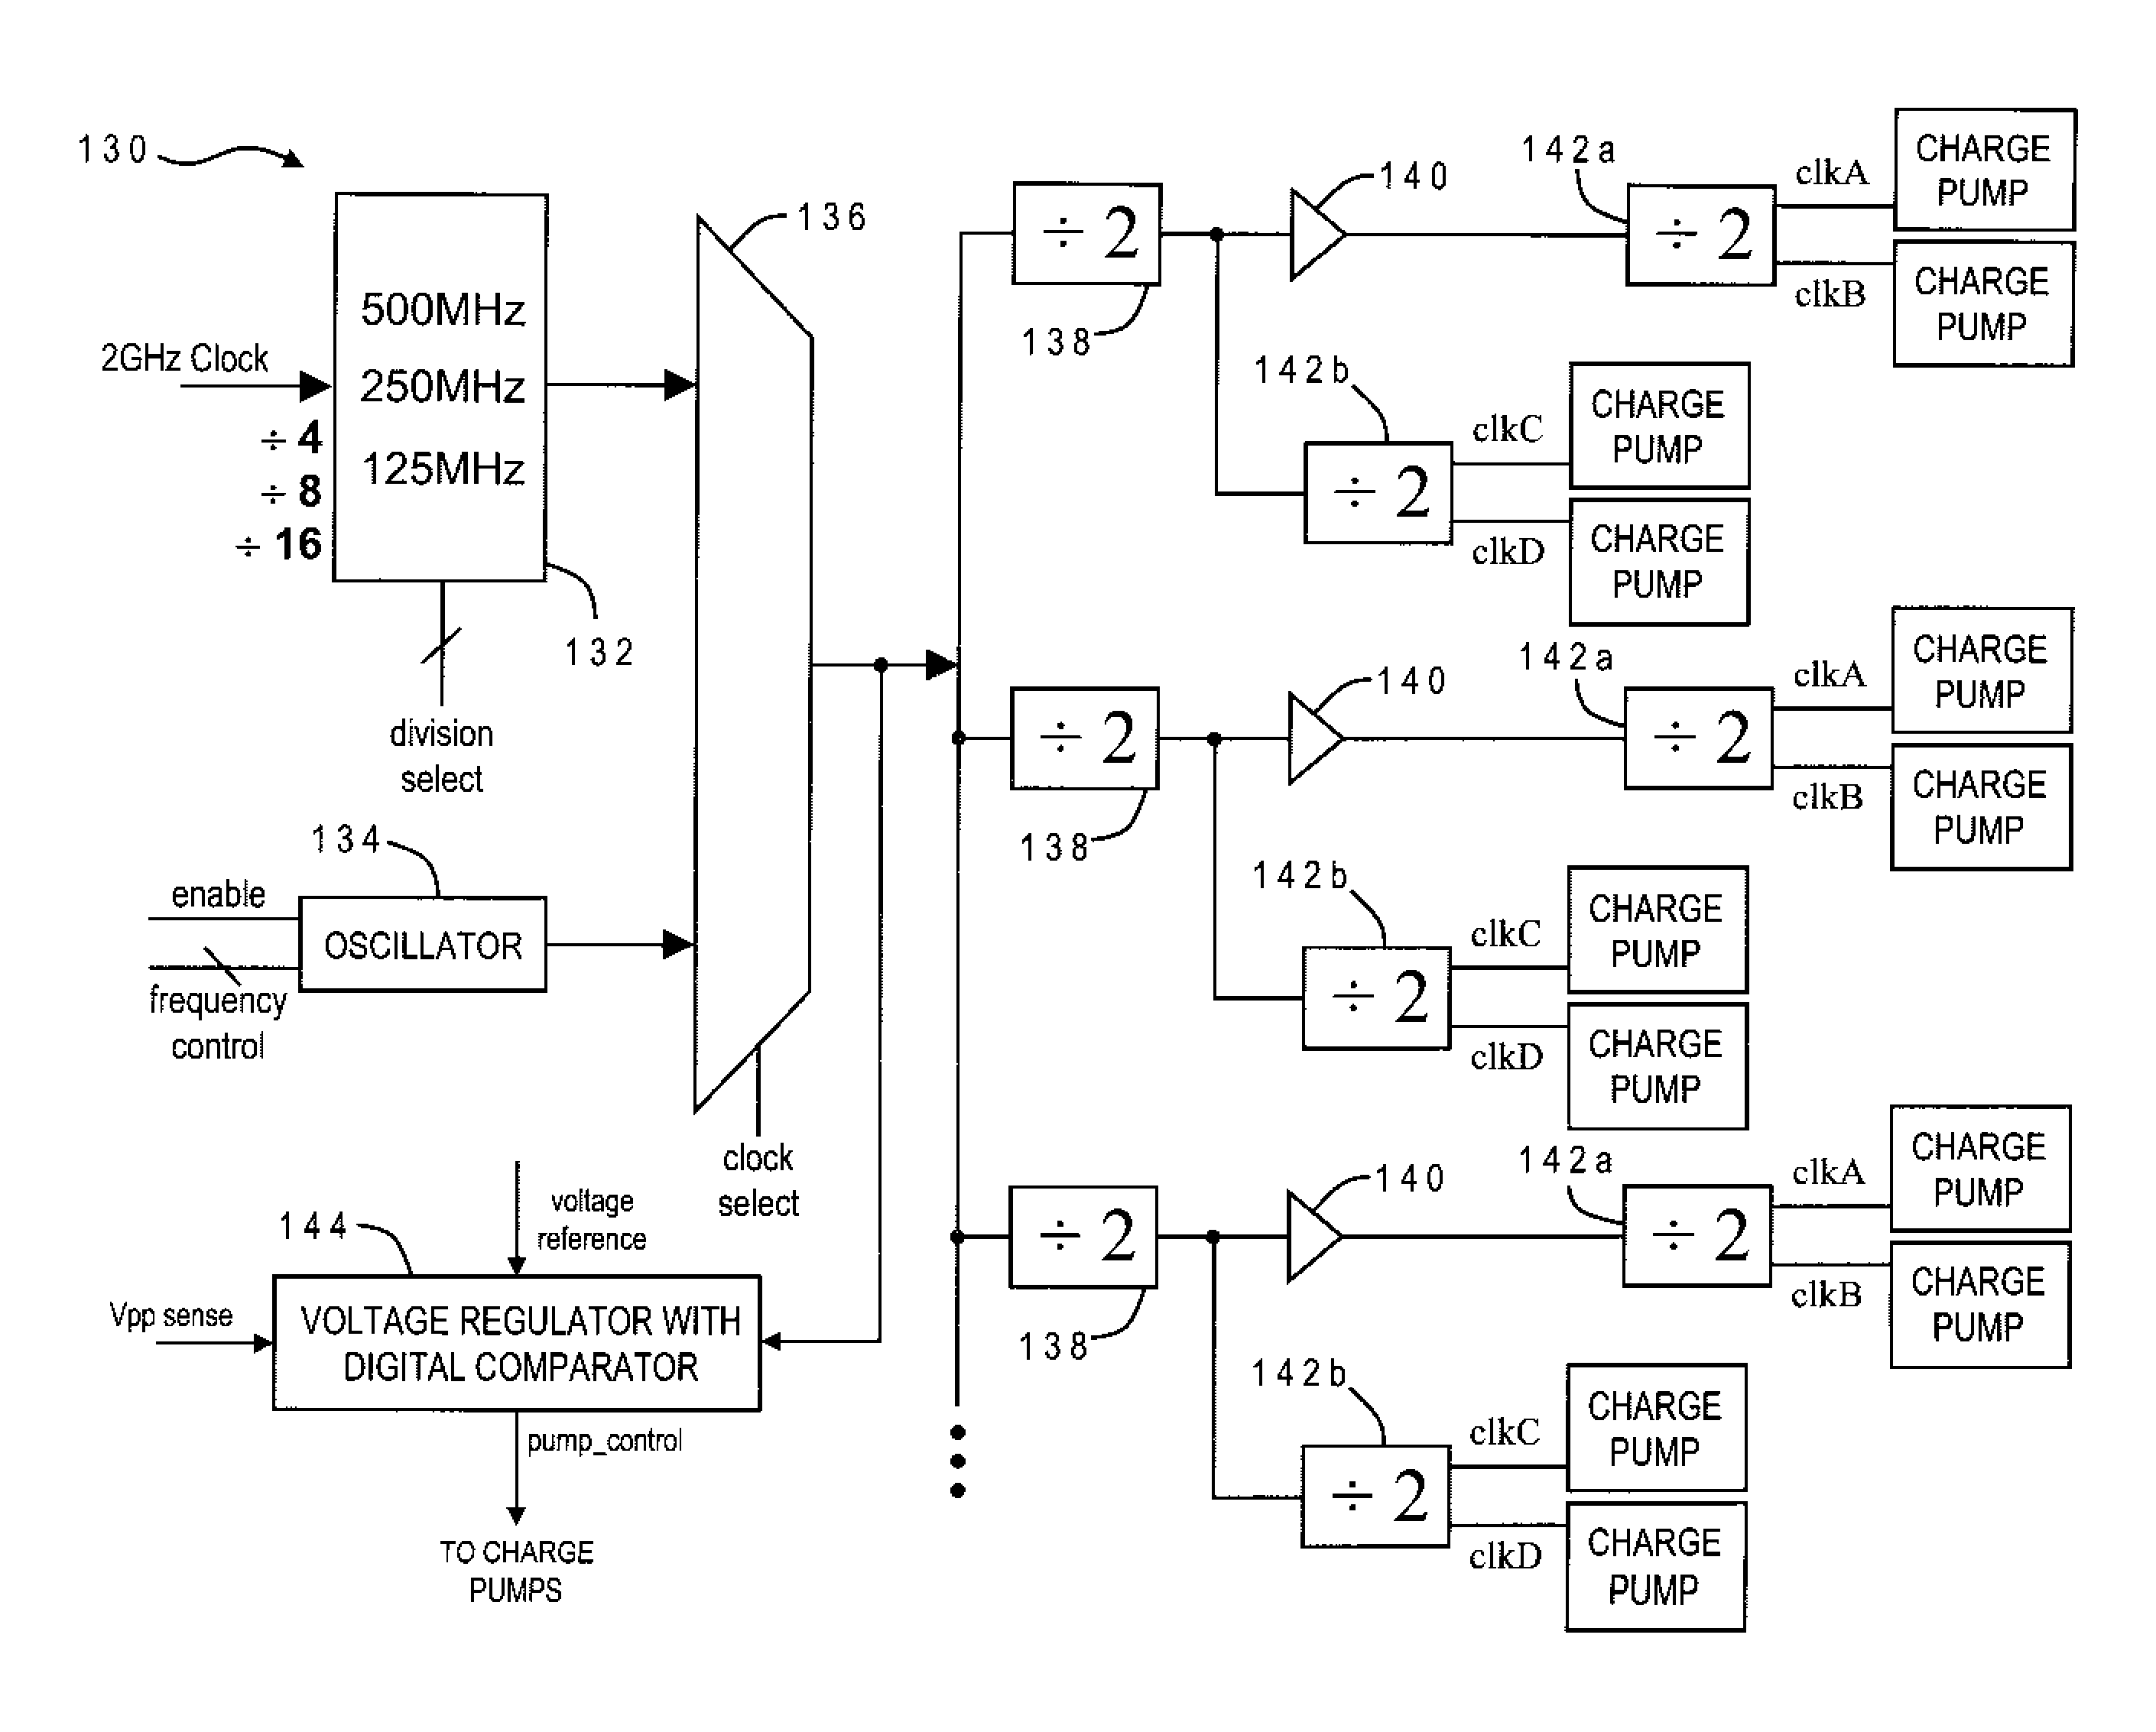 Peak power reduction methods in distributed charge pump systems